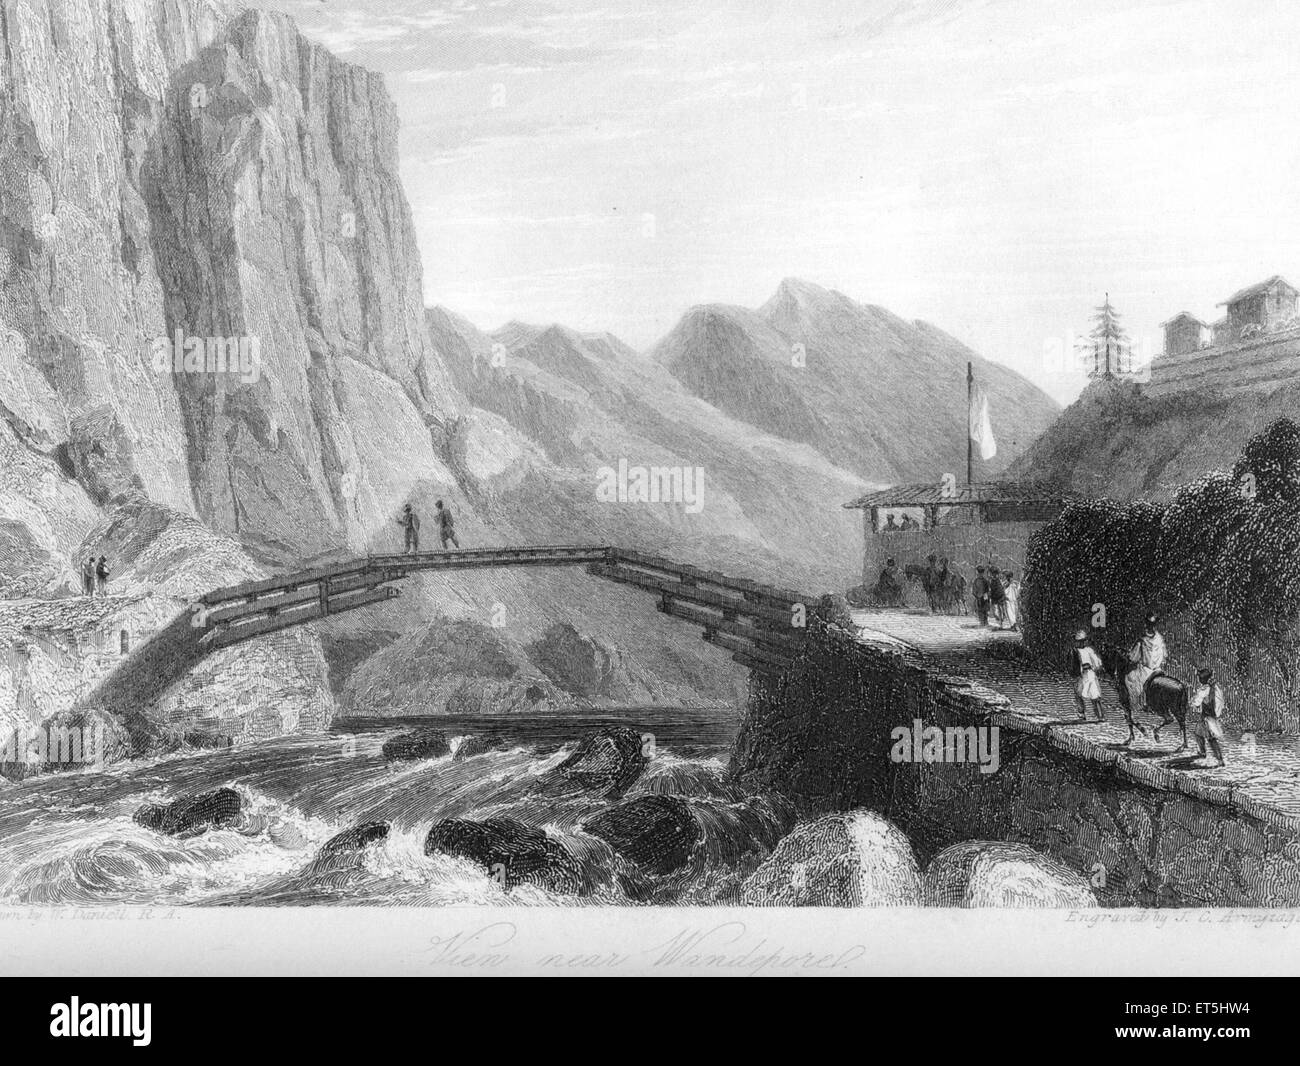 Crossing wooden bridge over river, Himalayas, India, Asia, Asian, Indian, old vintage 1800s steel engraving Stock Photo